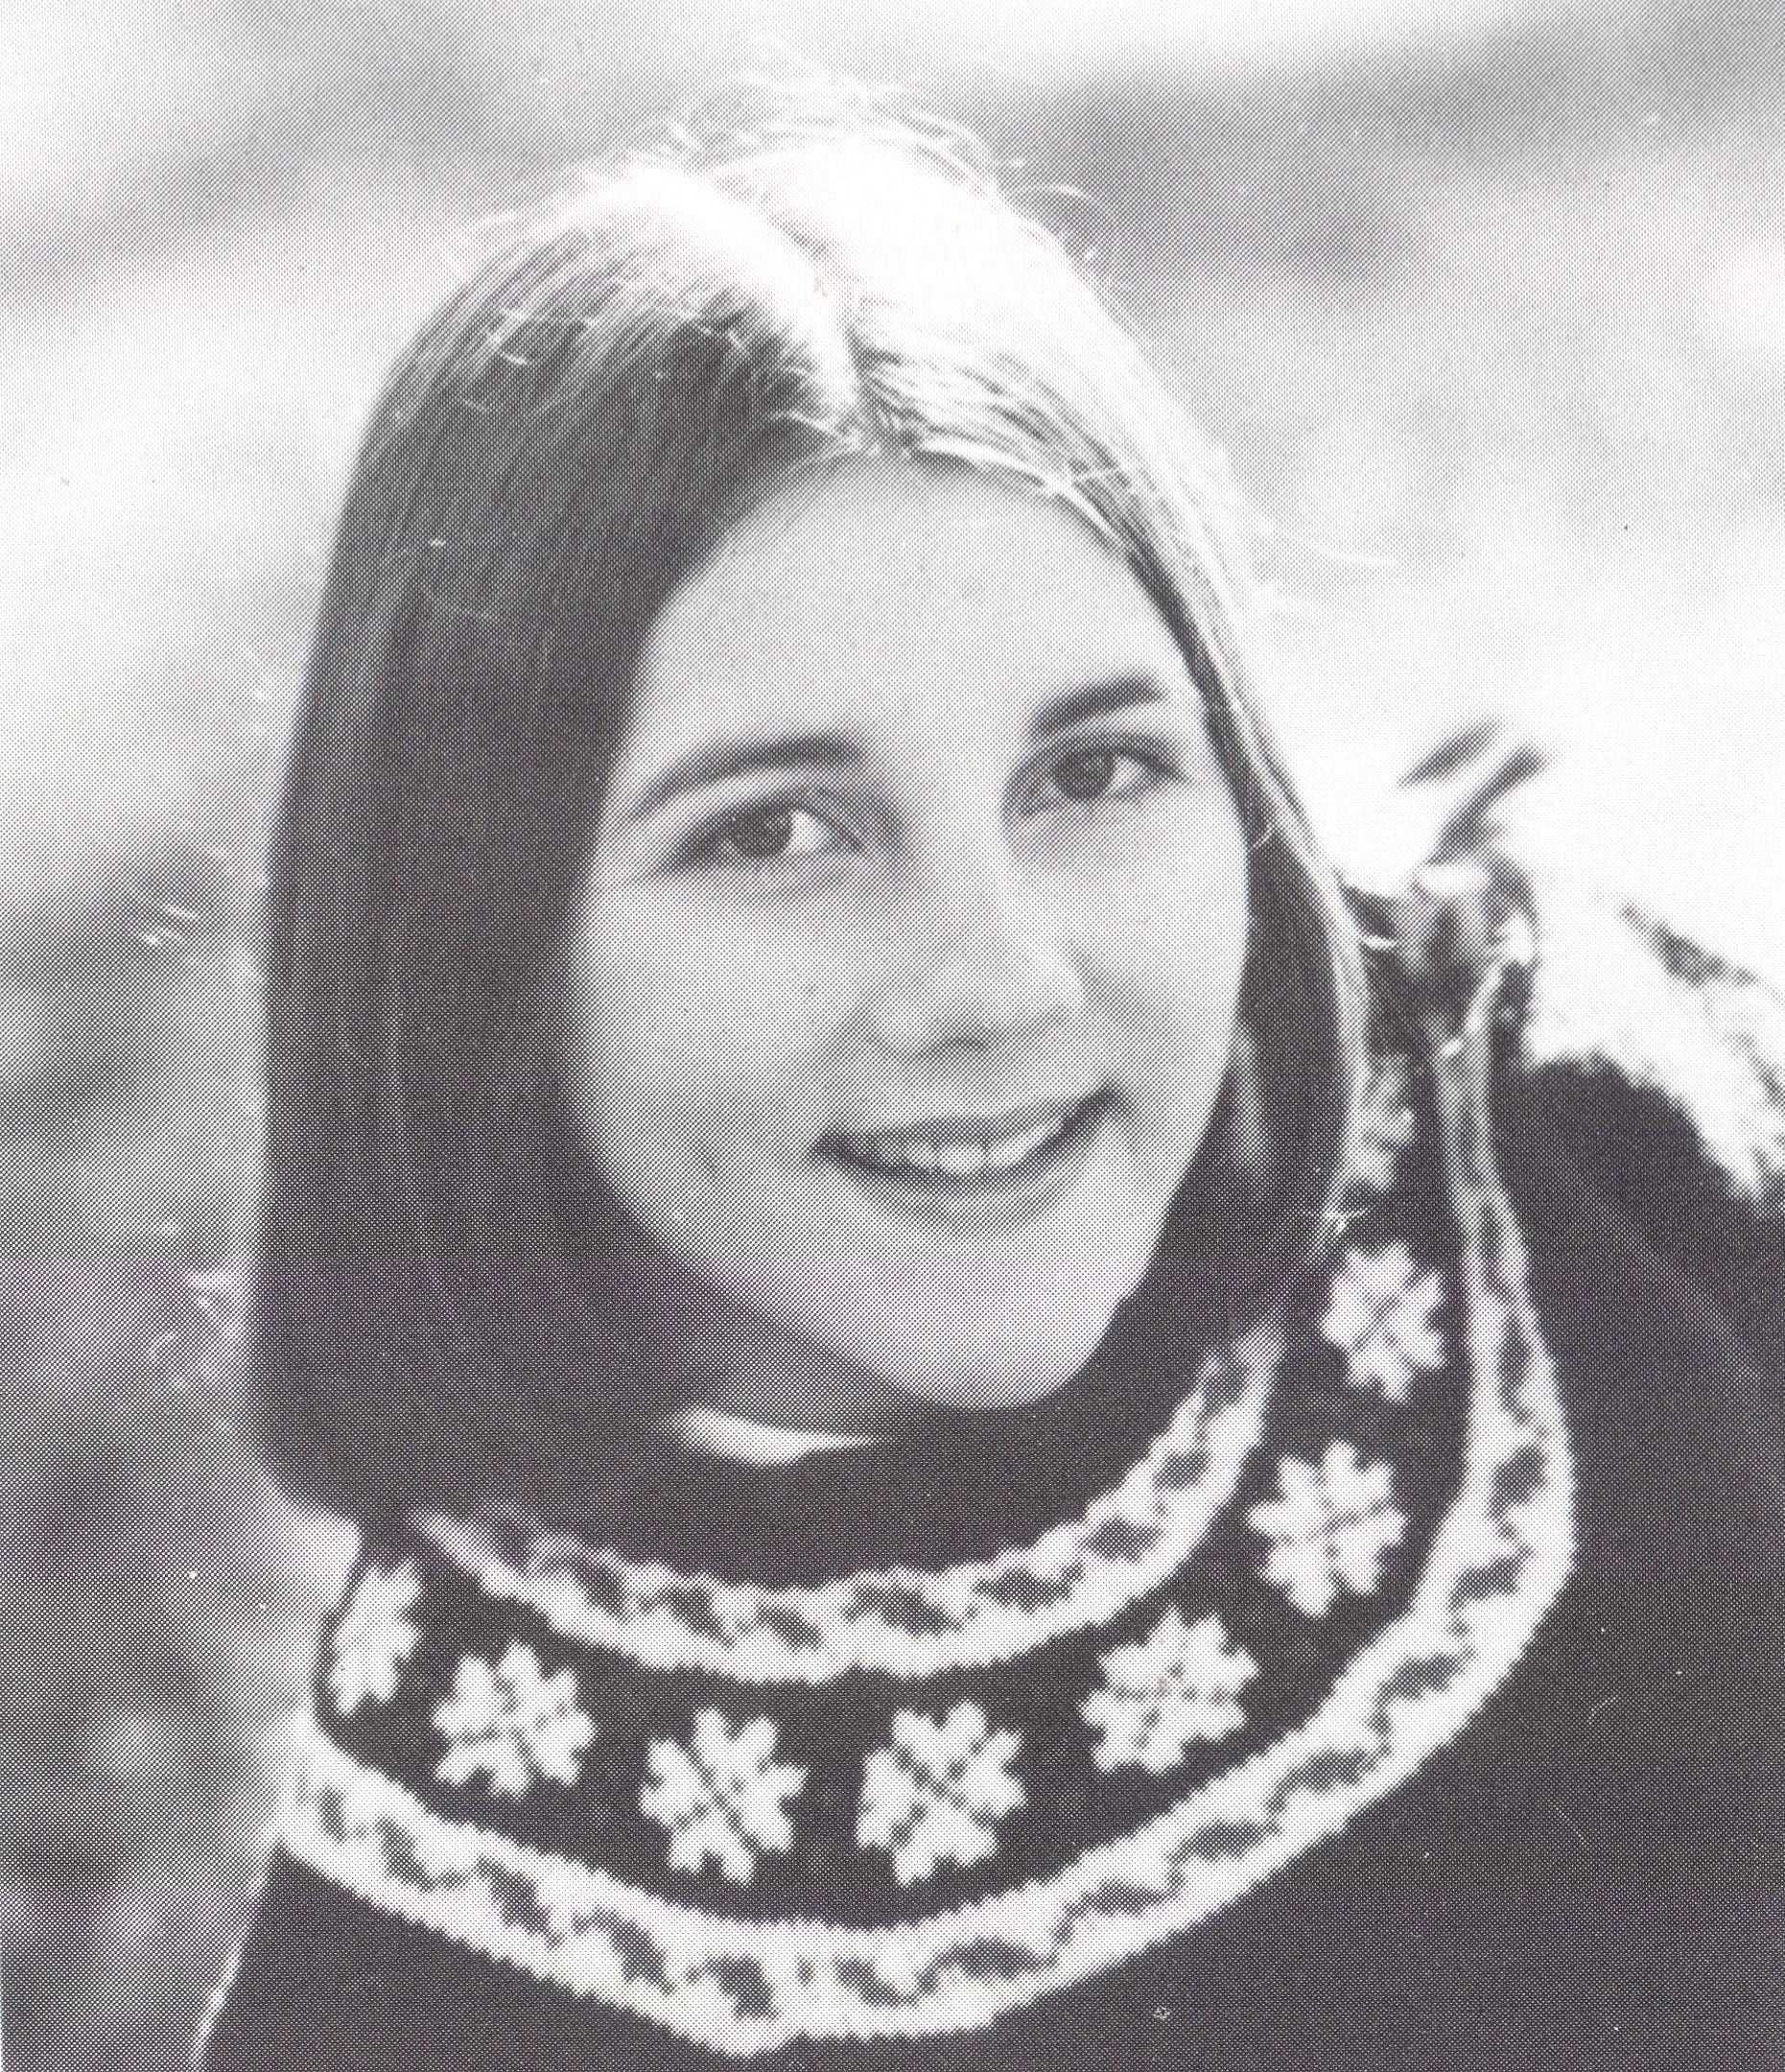 Yearbook Photo of Anne Wilson Gregory (Maclin), R-MC Class of 1977